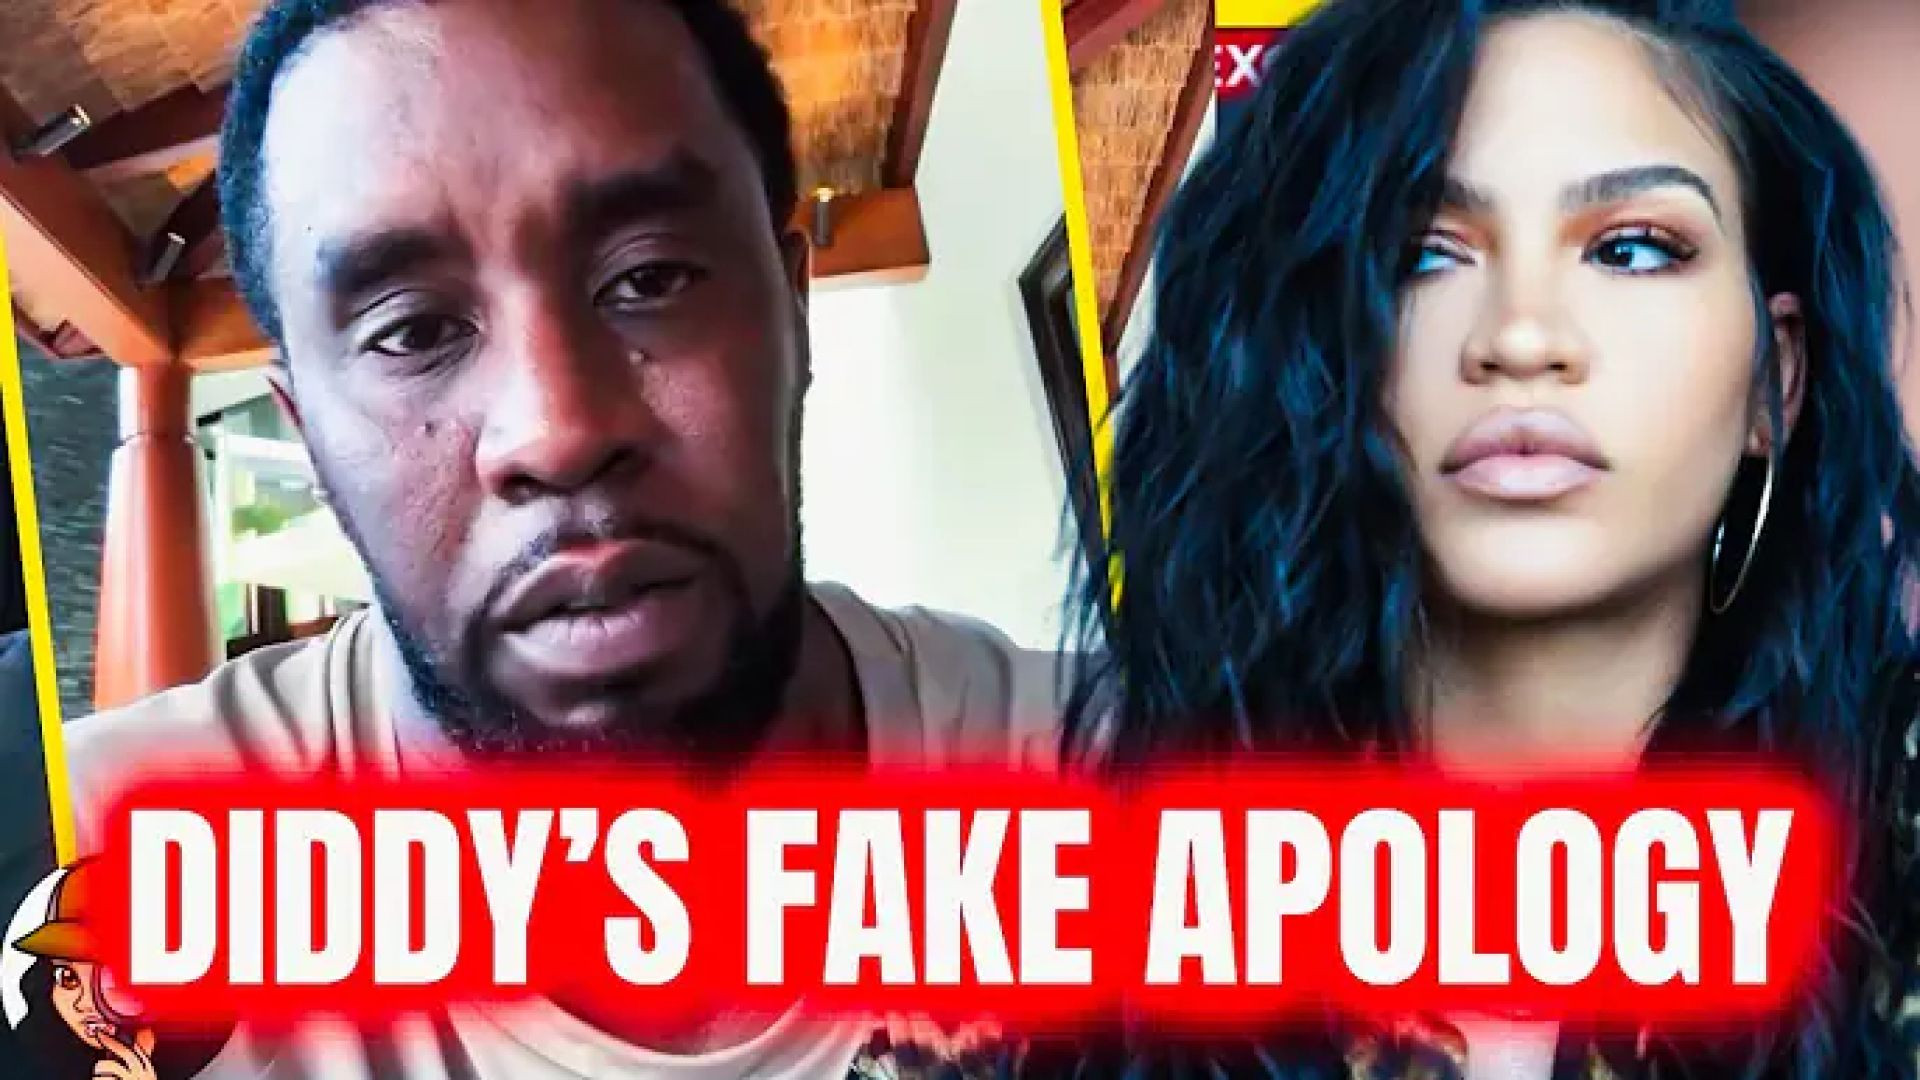 BREAKING NEWS : Sean ＂Diddy＂ Combs apology video of beating Cassie